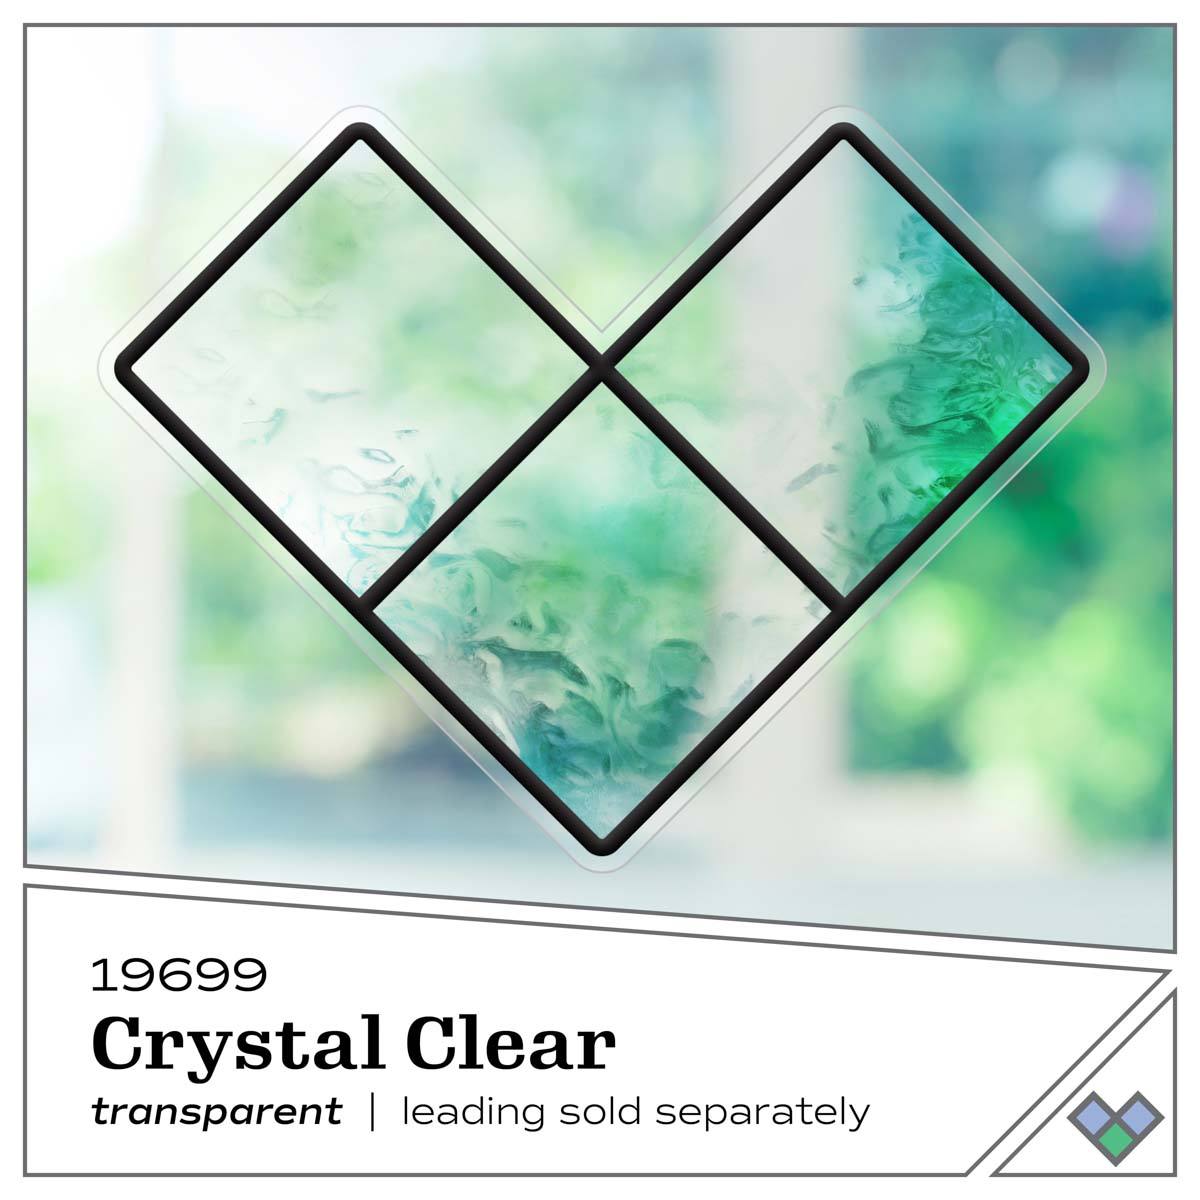 Gallery Glass ® Stained Glass Effect Paint - Crystal Clear, 8 oz. - 19699